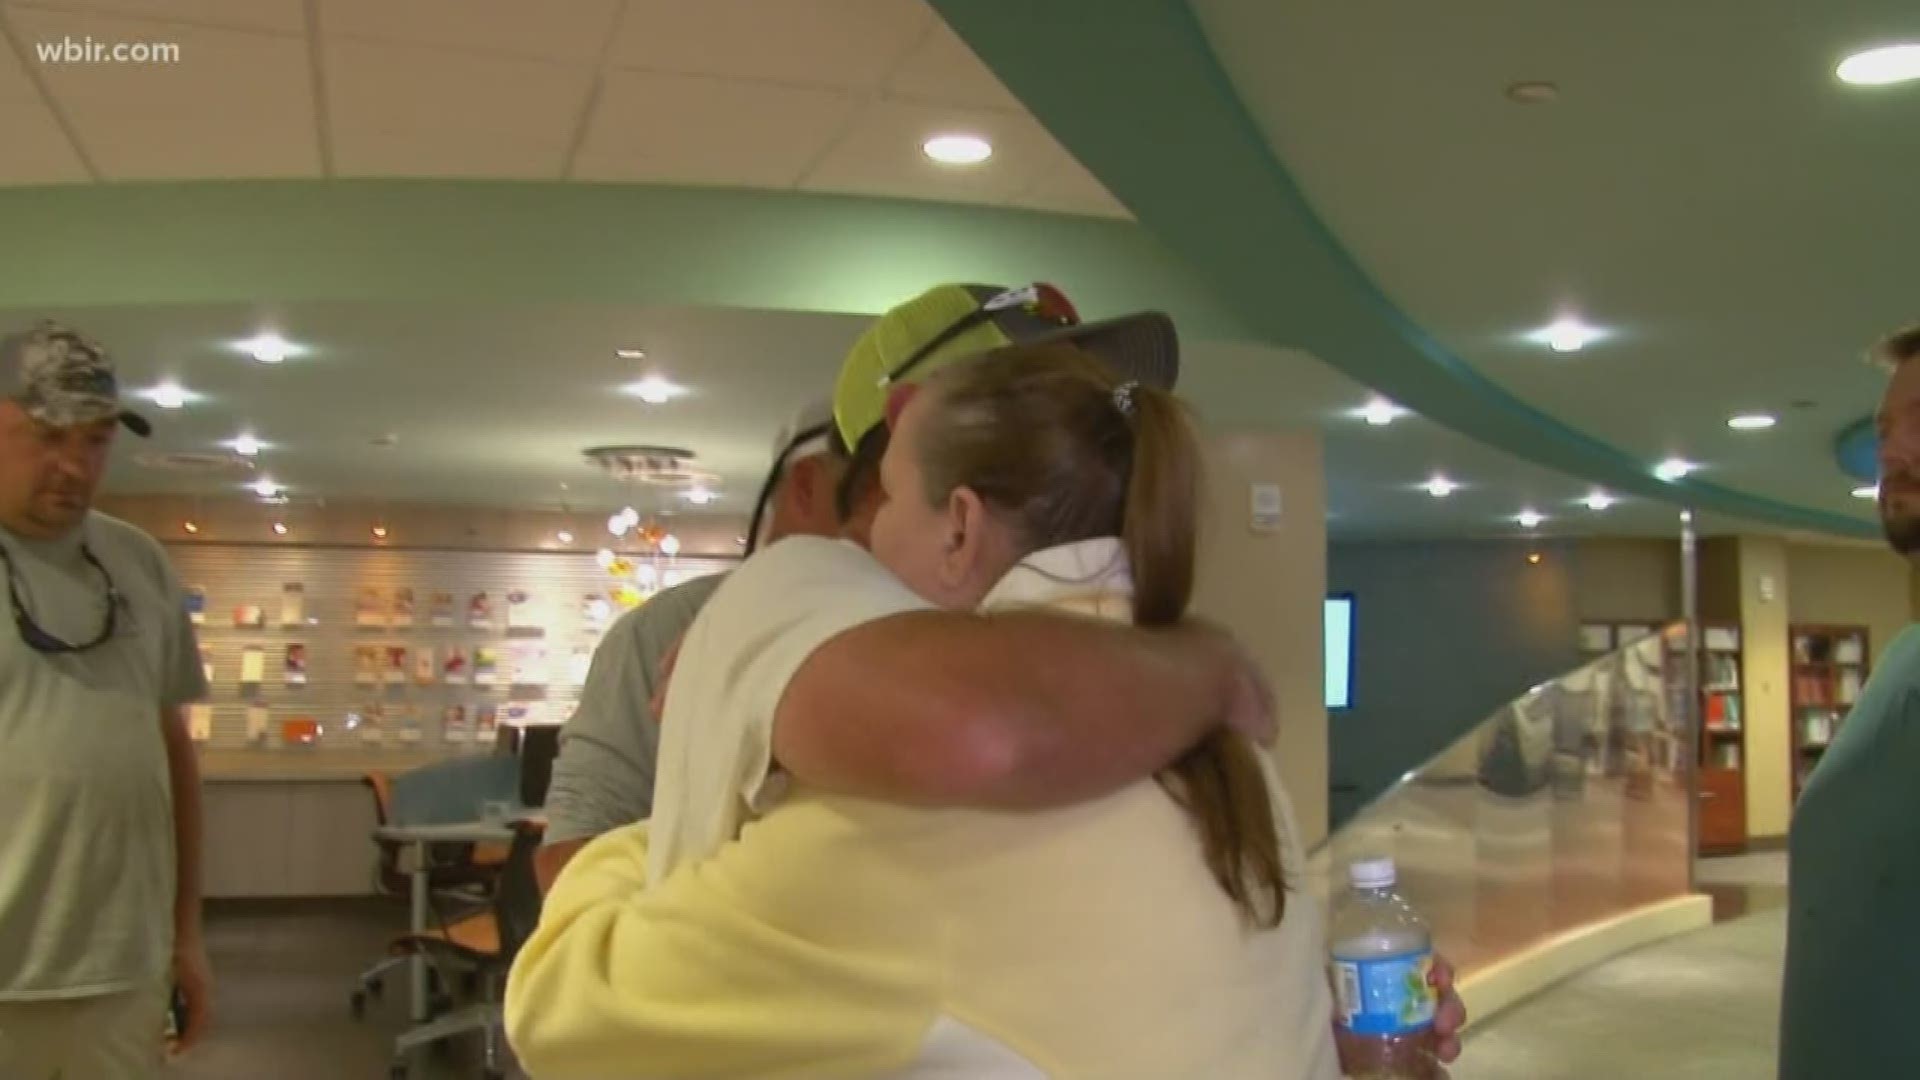 57-year-old Ronald Greene was with his friend near Fort Loudoun Dam Monday when their boat overturned.  An emotional reunion happened Tuesday as the family thanked the fisherman who saved their husband and father.